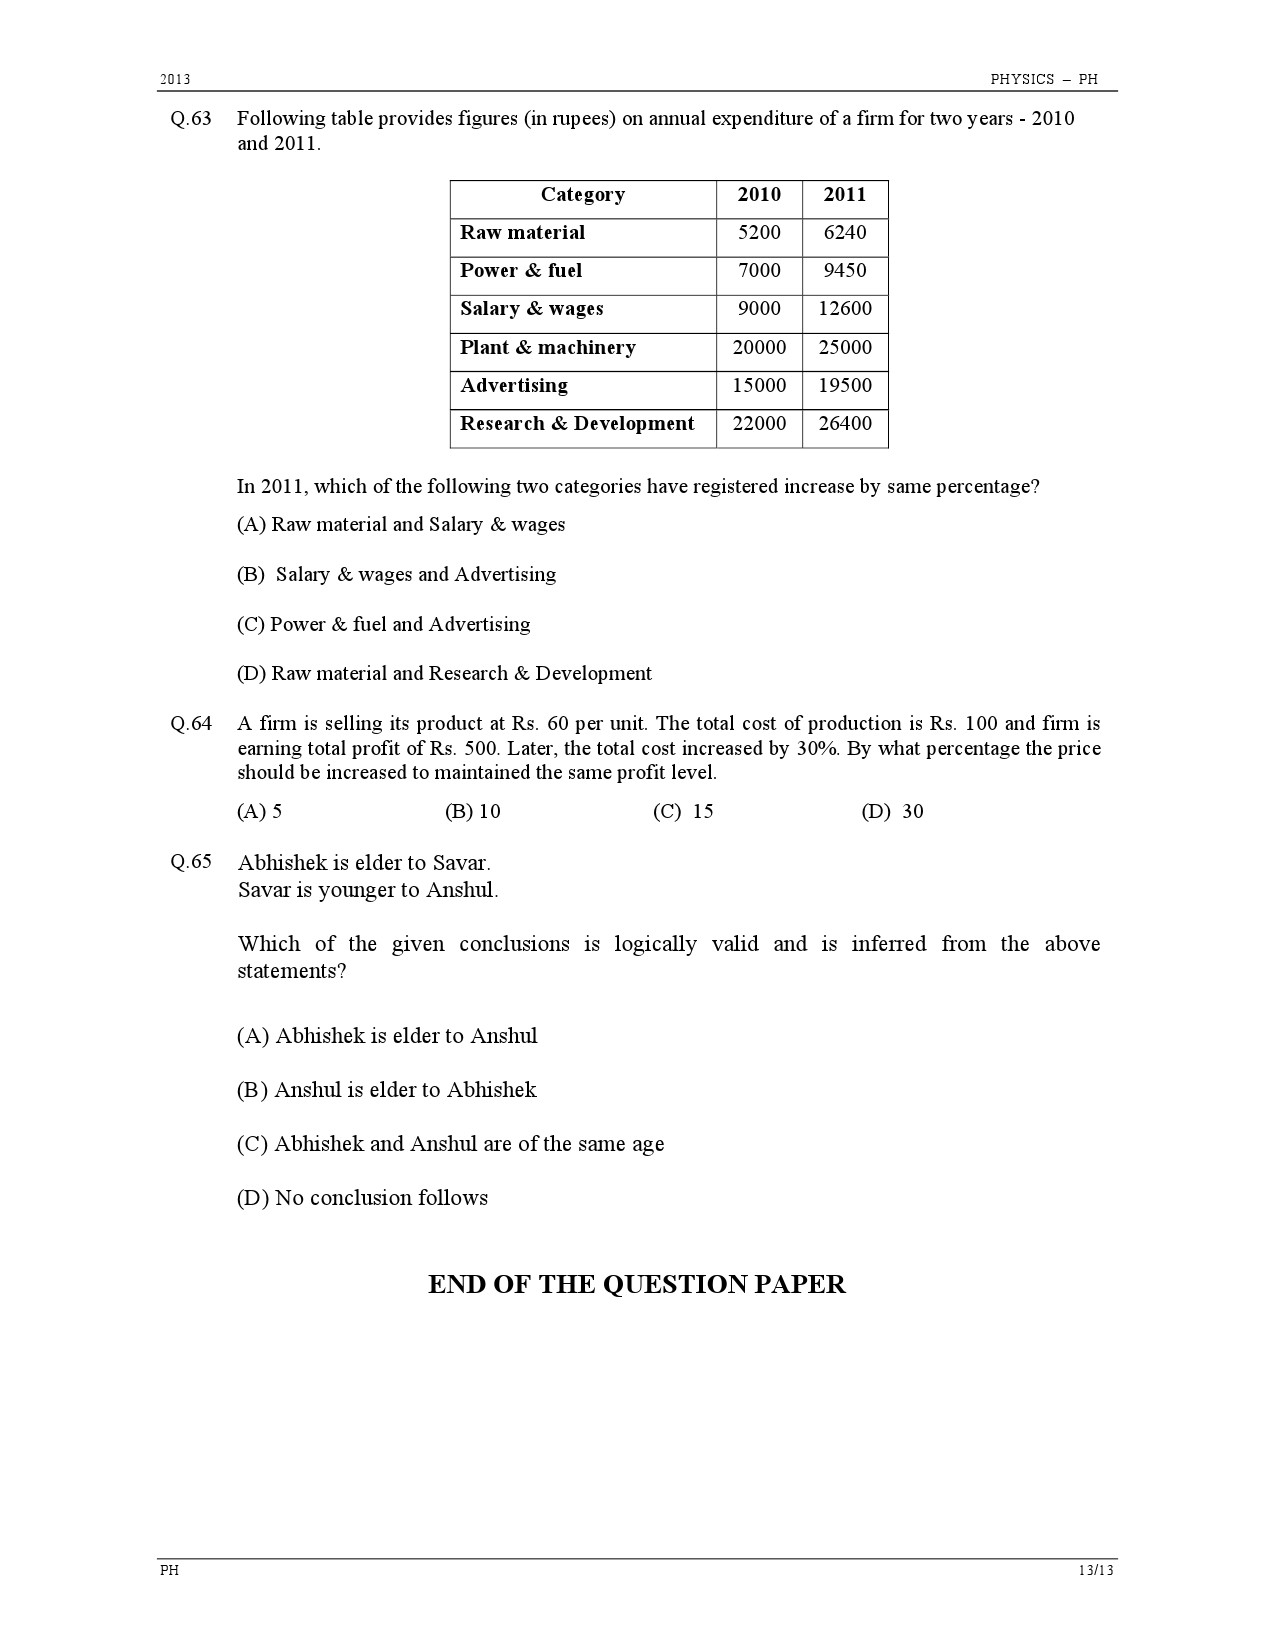 GATE Exam Question Paper 2013 Physics 13